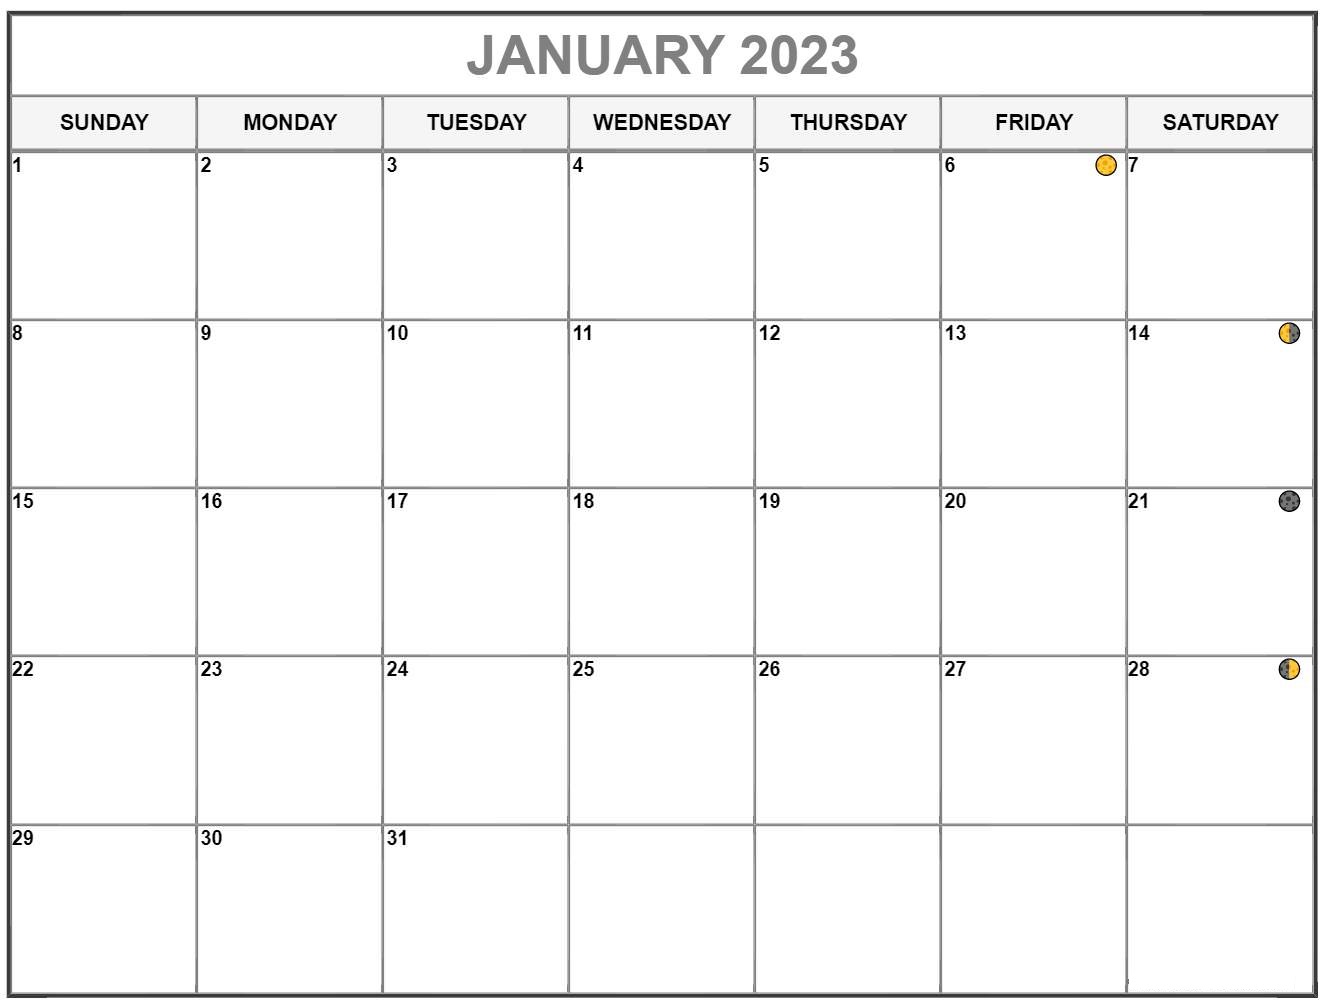 Lunar January 2023 Calendar Moon Phases Templates With Dates